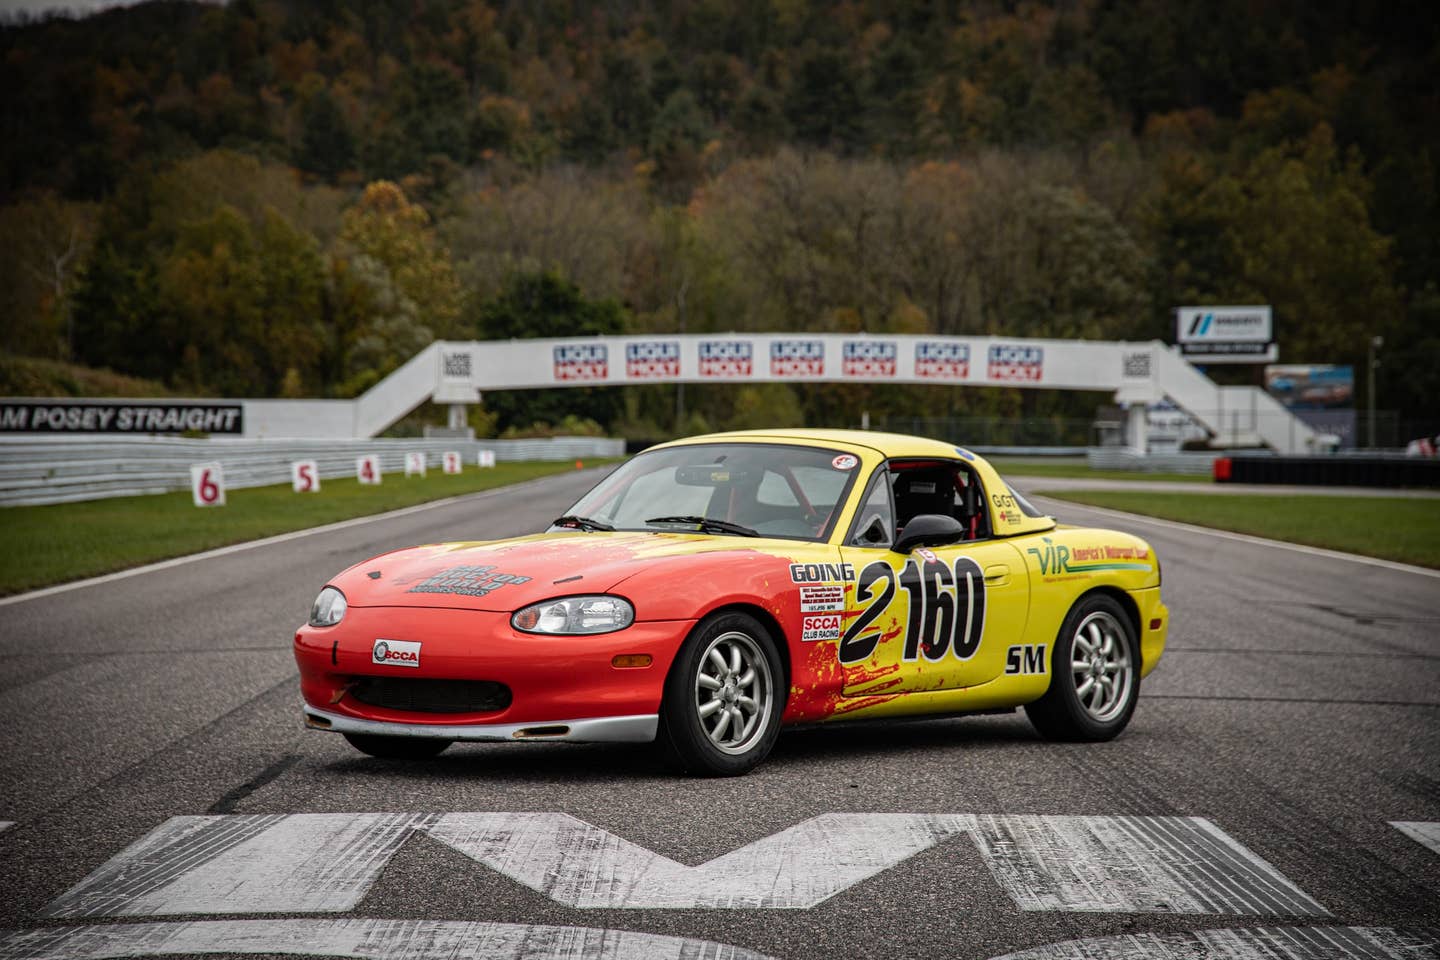 NASCAR driver and racing commentator Parker Kligerman took some laps on Lime Rock's real course. The car looked good out there! <em><em>Photography by Automotive Restorations, Inc.</em></em>